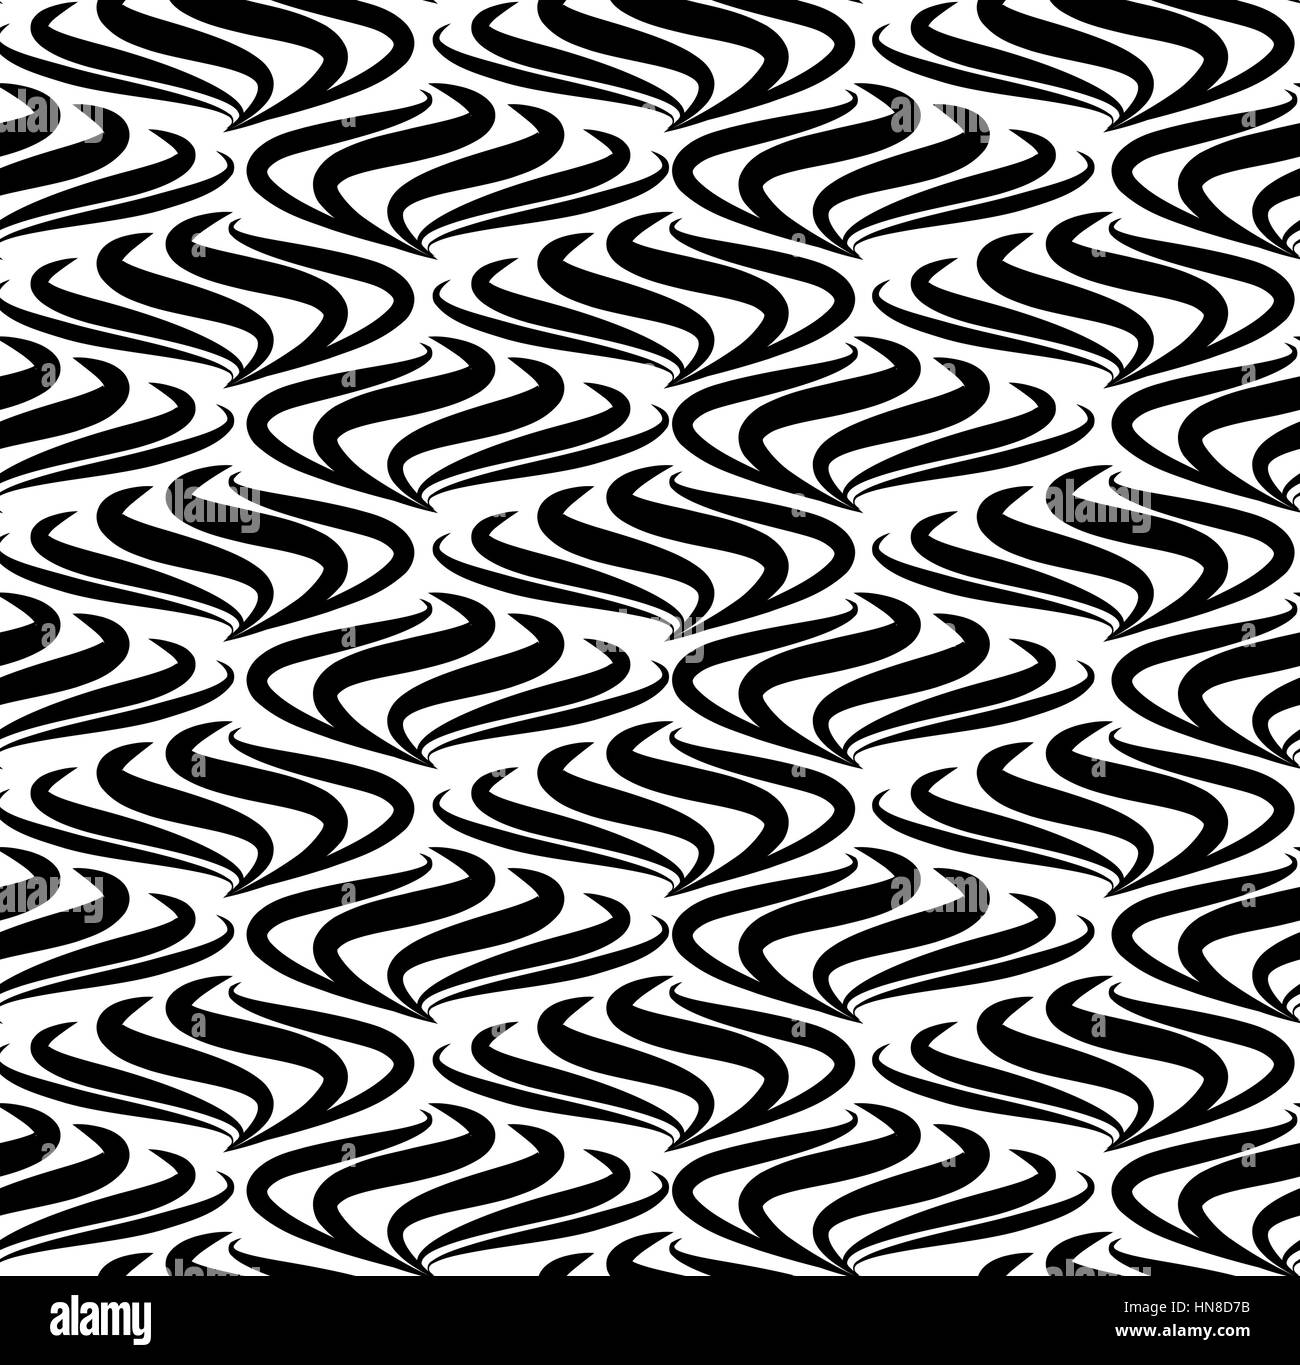 Abstract Seamless Pattern With Black And White Line Ornament